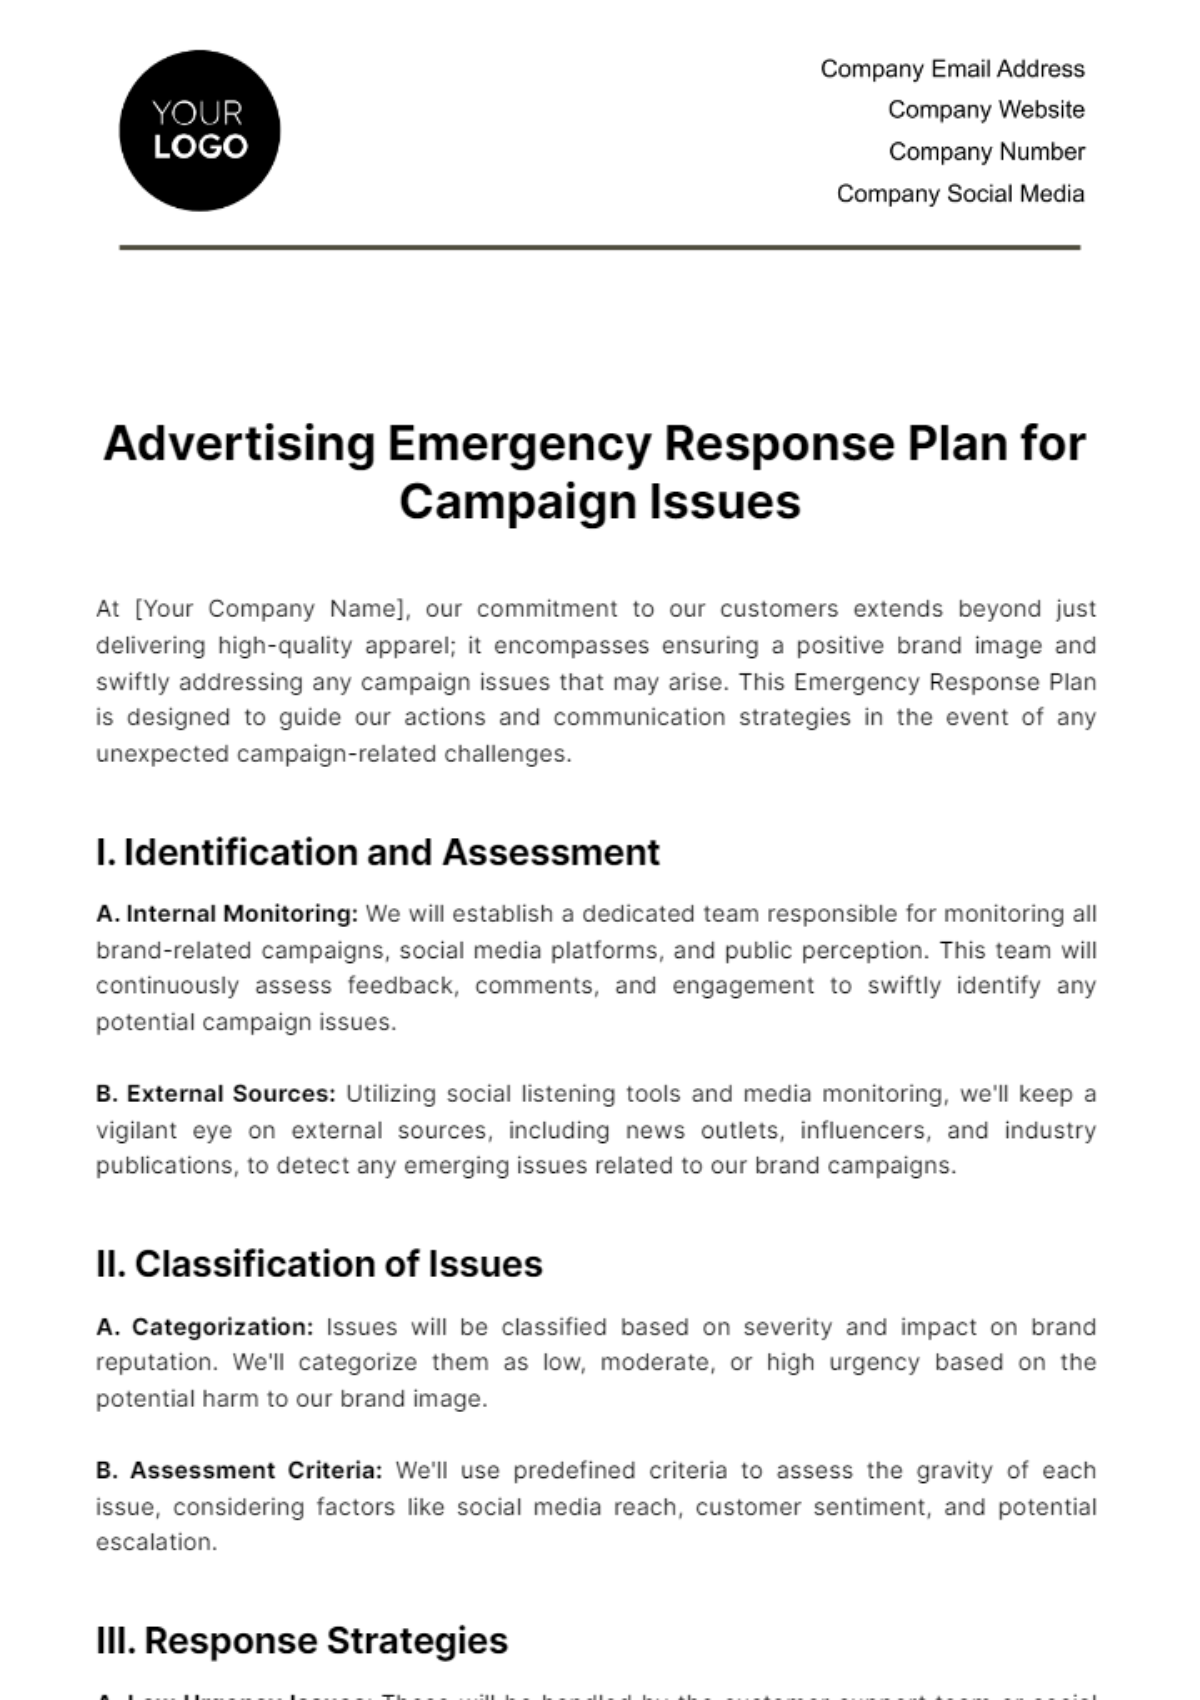 Free Advertising Emergency Response Plan for Campaign Issues Template